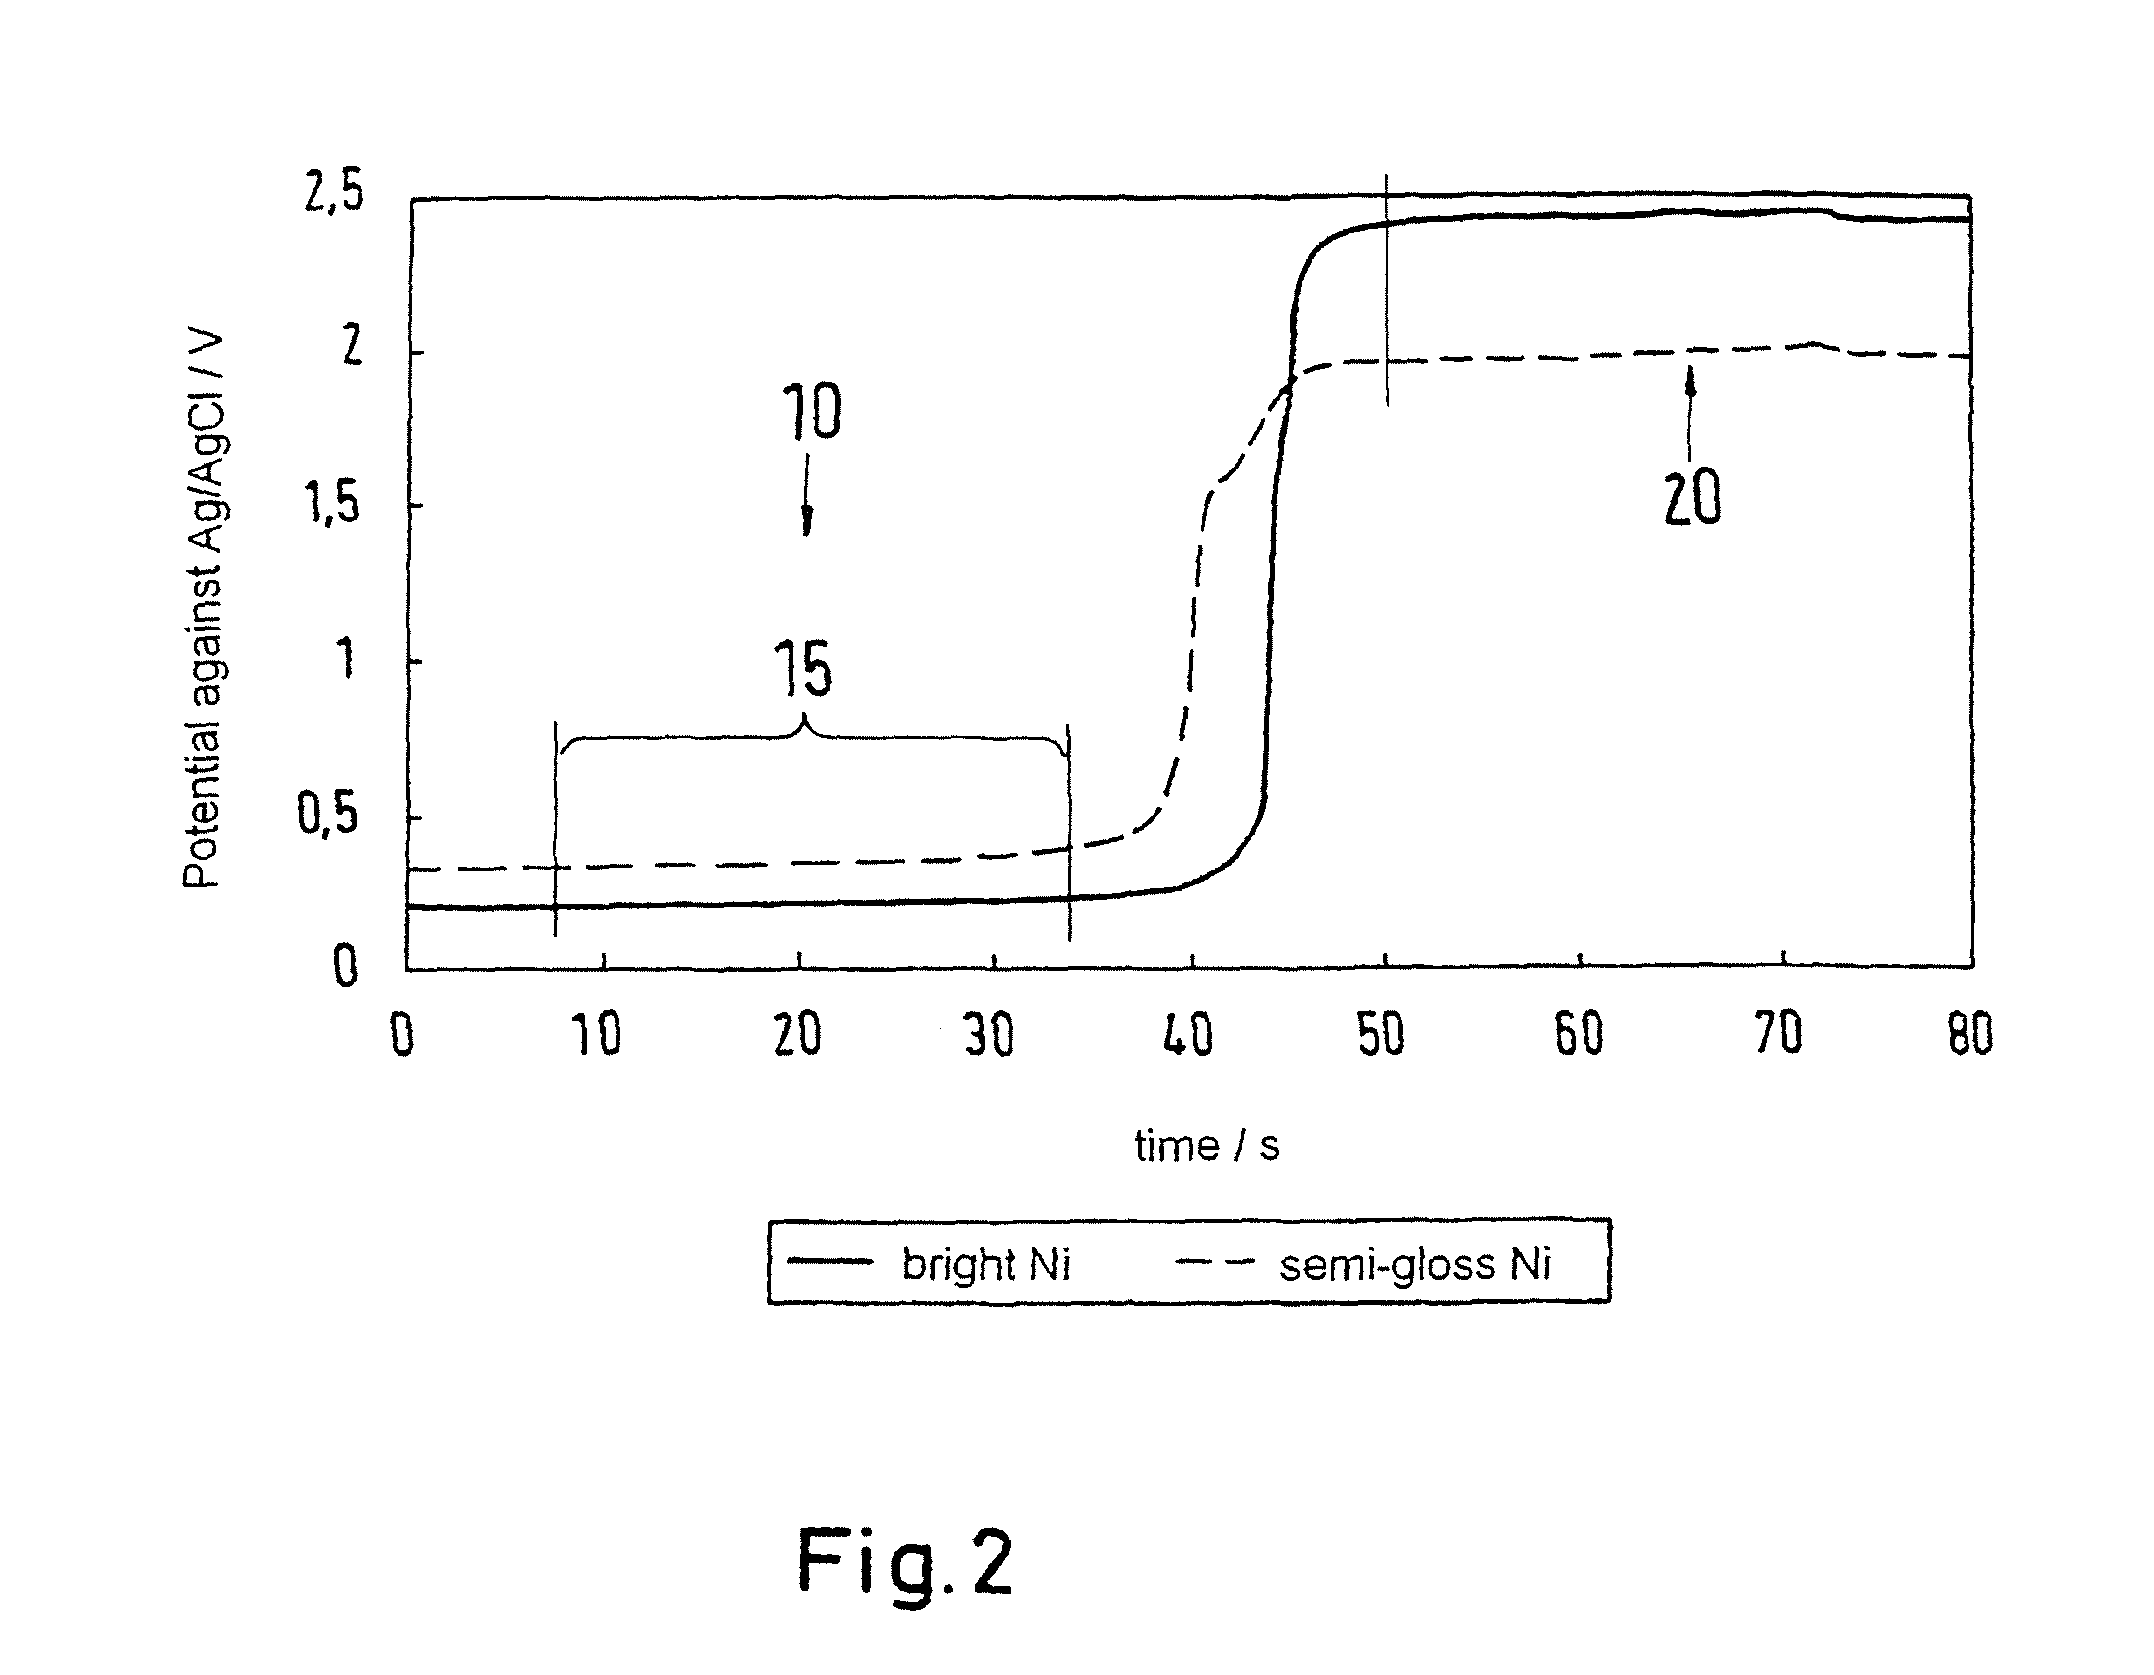 Method of inspecting a metal coating and a method for analytical control of a deposition electrolyte serving to deposit said metal coating